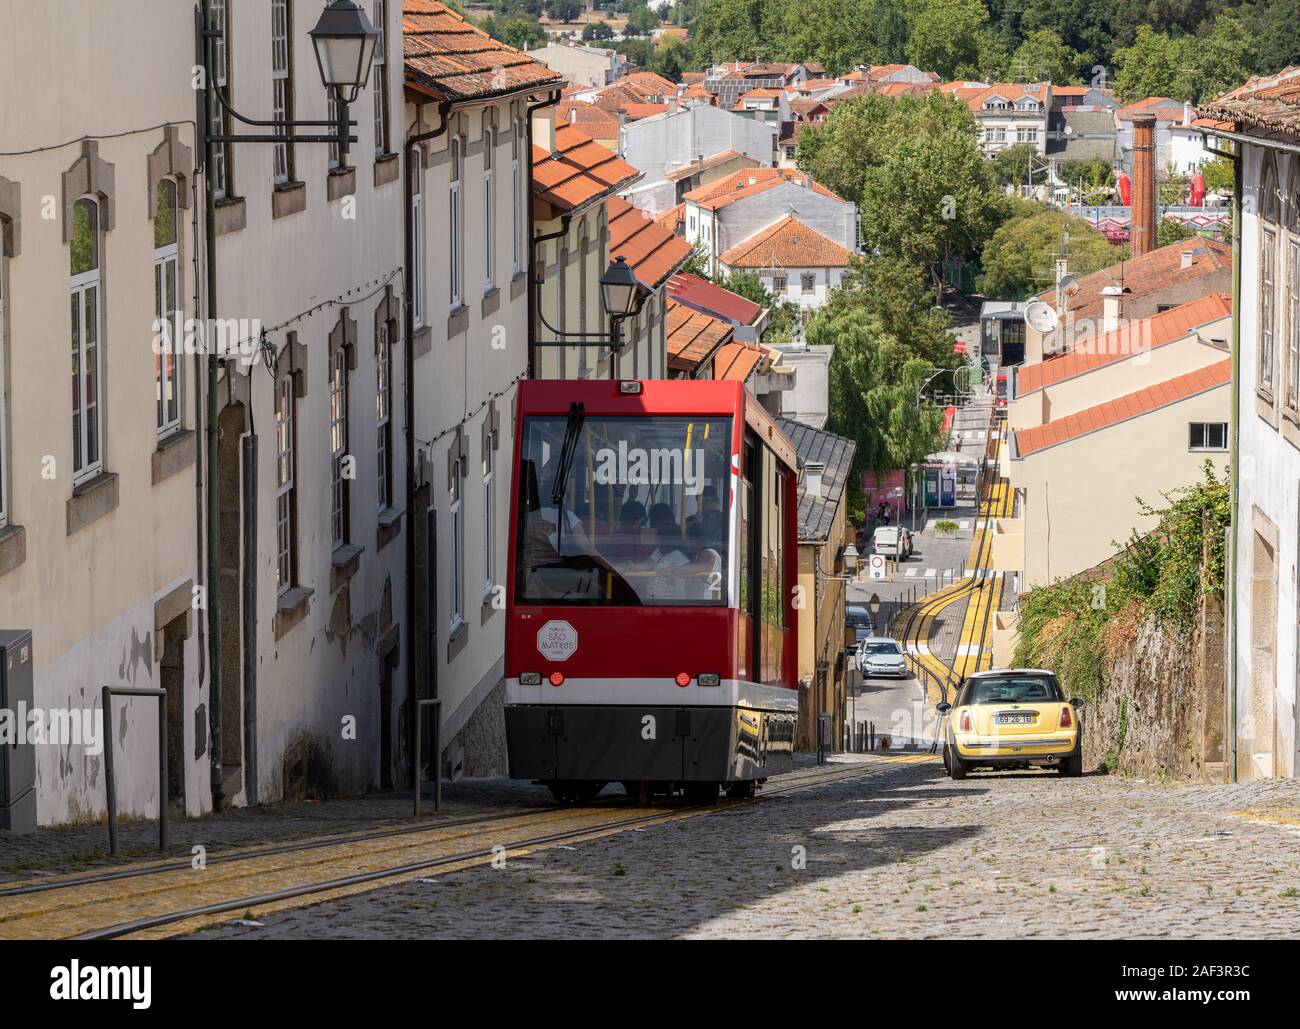 Viseu, Portugal - 19 August 2019: Red tramcar or funicular railway crosses into the old town station Stock Photo